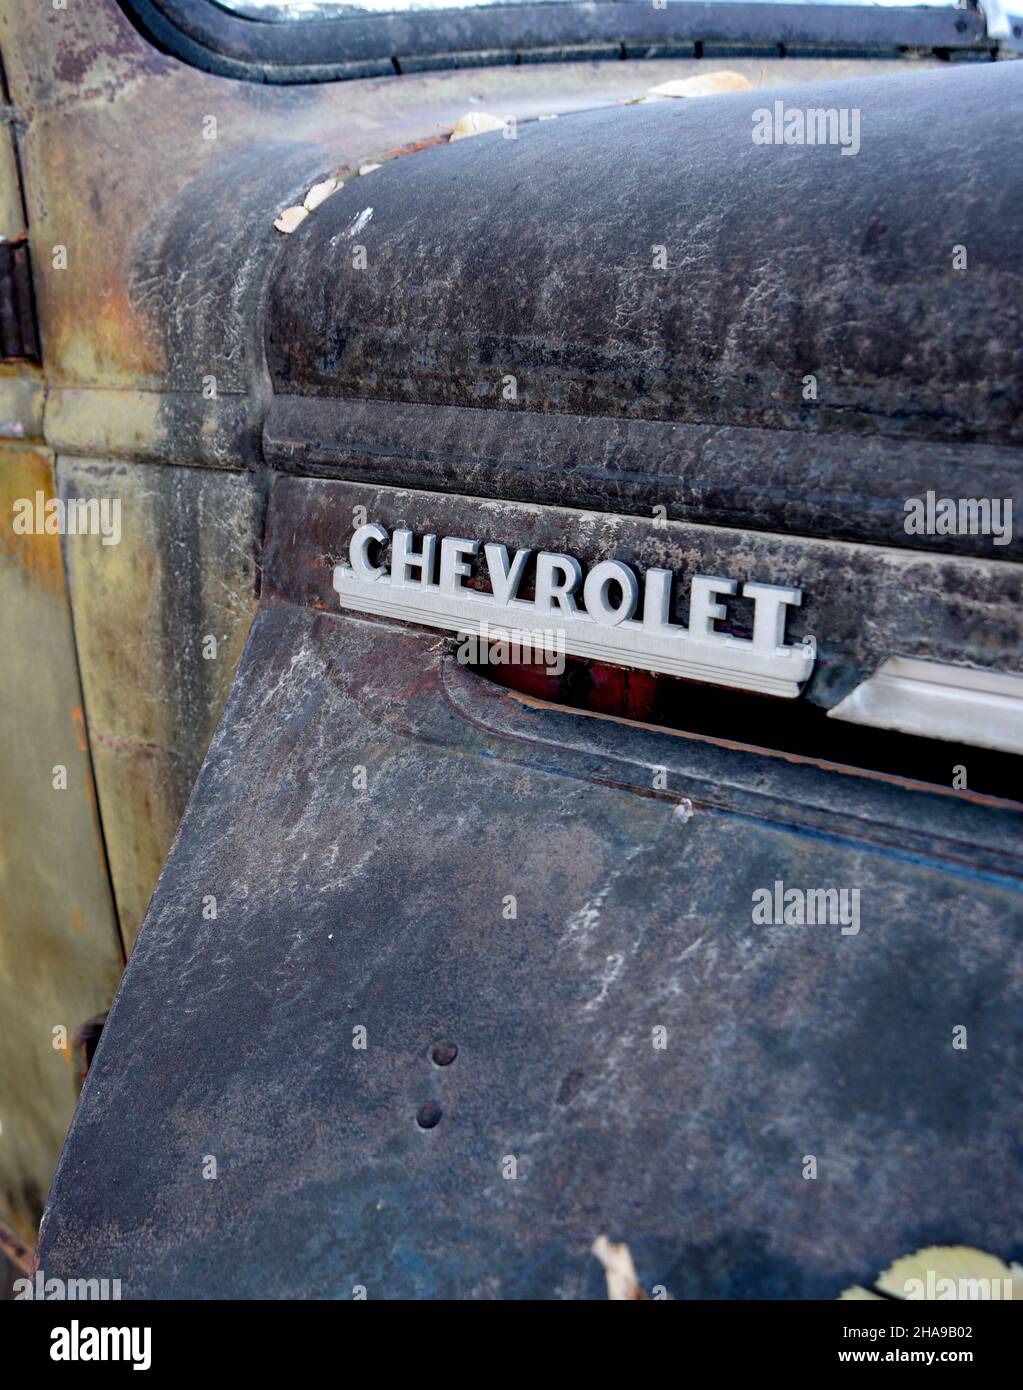 A vintage 1940s Chevrolet machine shop and garage truck retired from service and parked in Taos, New Mexico. Stock Photo